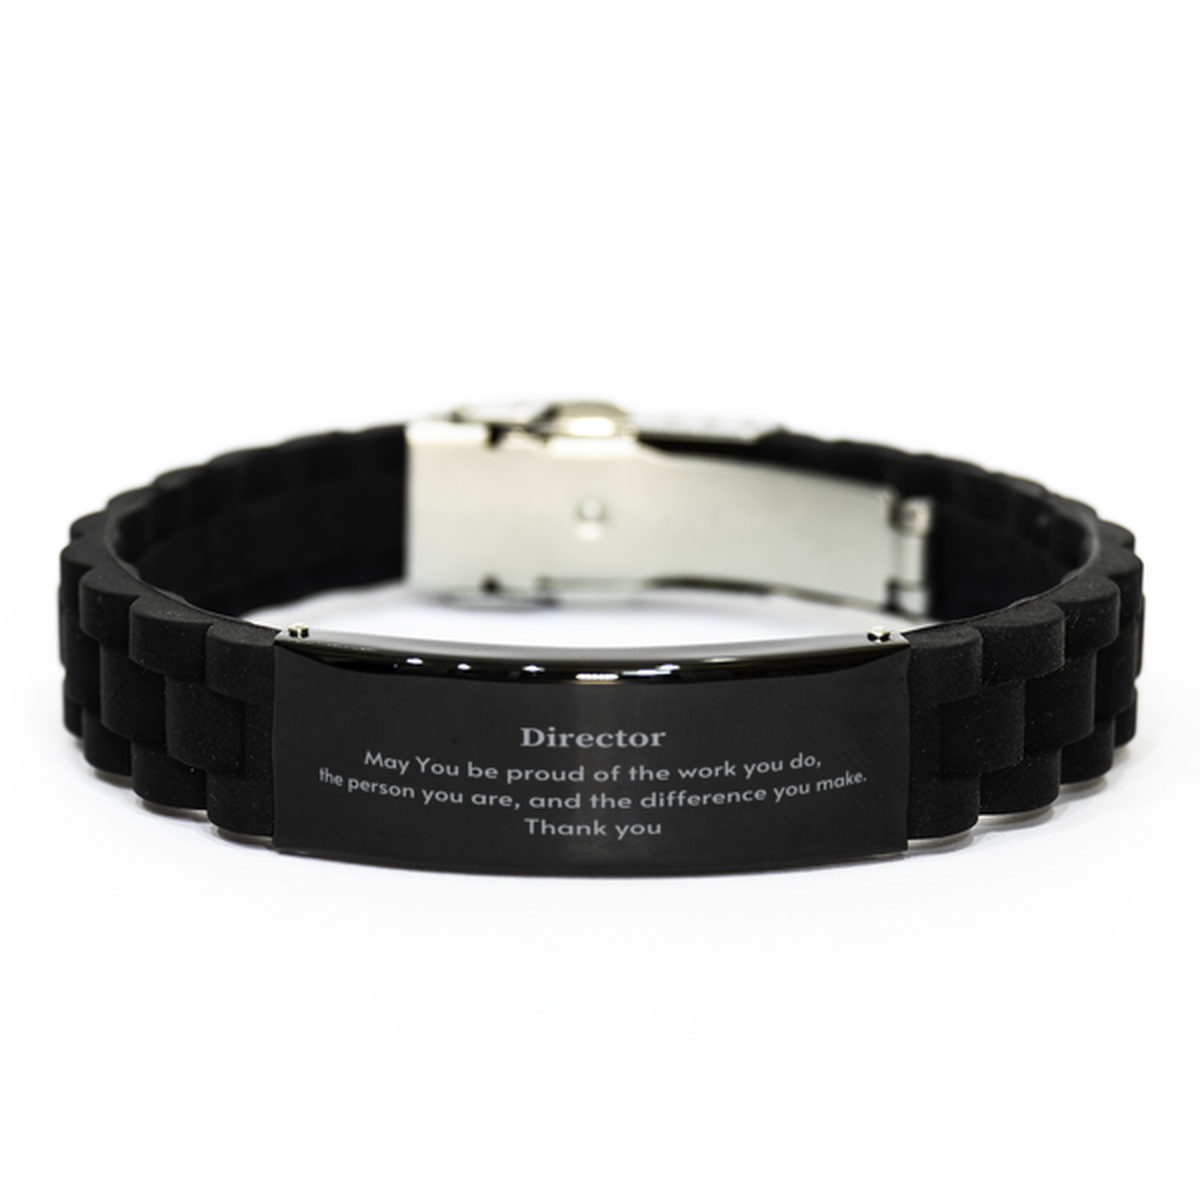 Heartwarming Black Glidelock Clasp Bracelet Retirement Coworkers Gifts for Director, Director May You be proud of the work you do, the person you are Gifts for Boss Men Women Friends